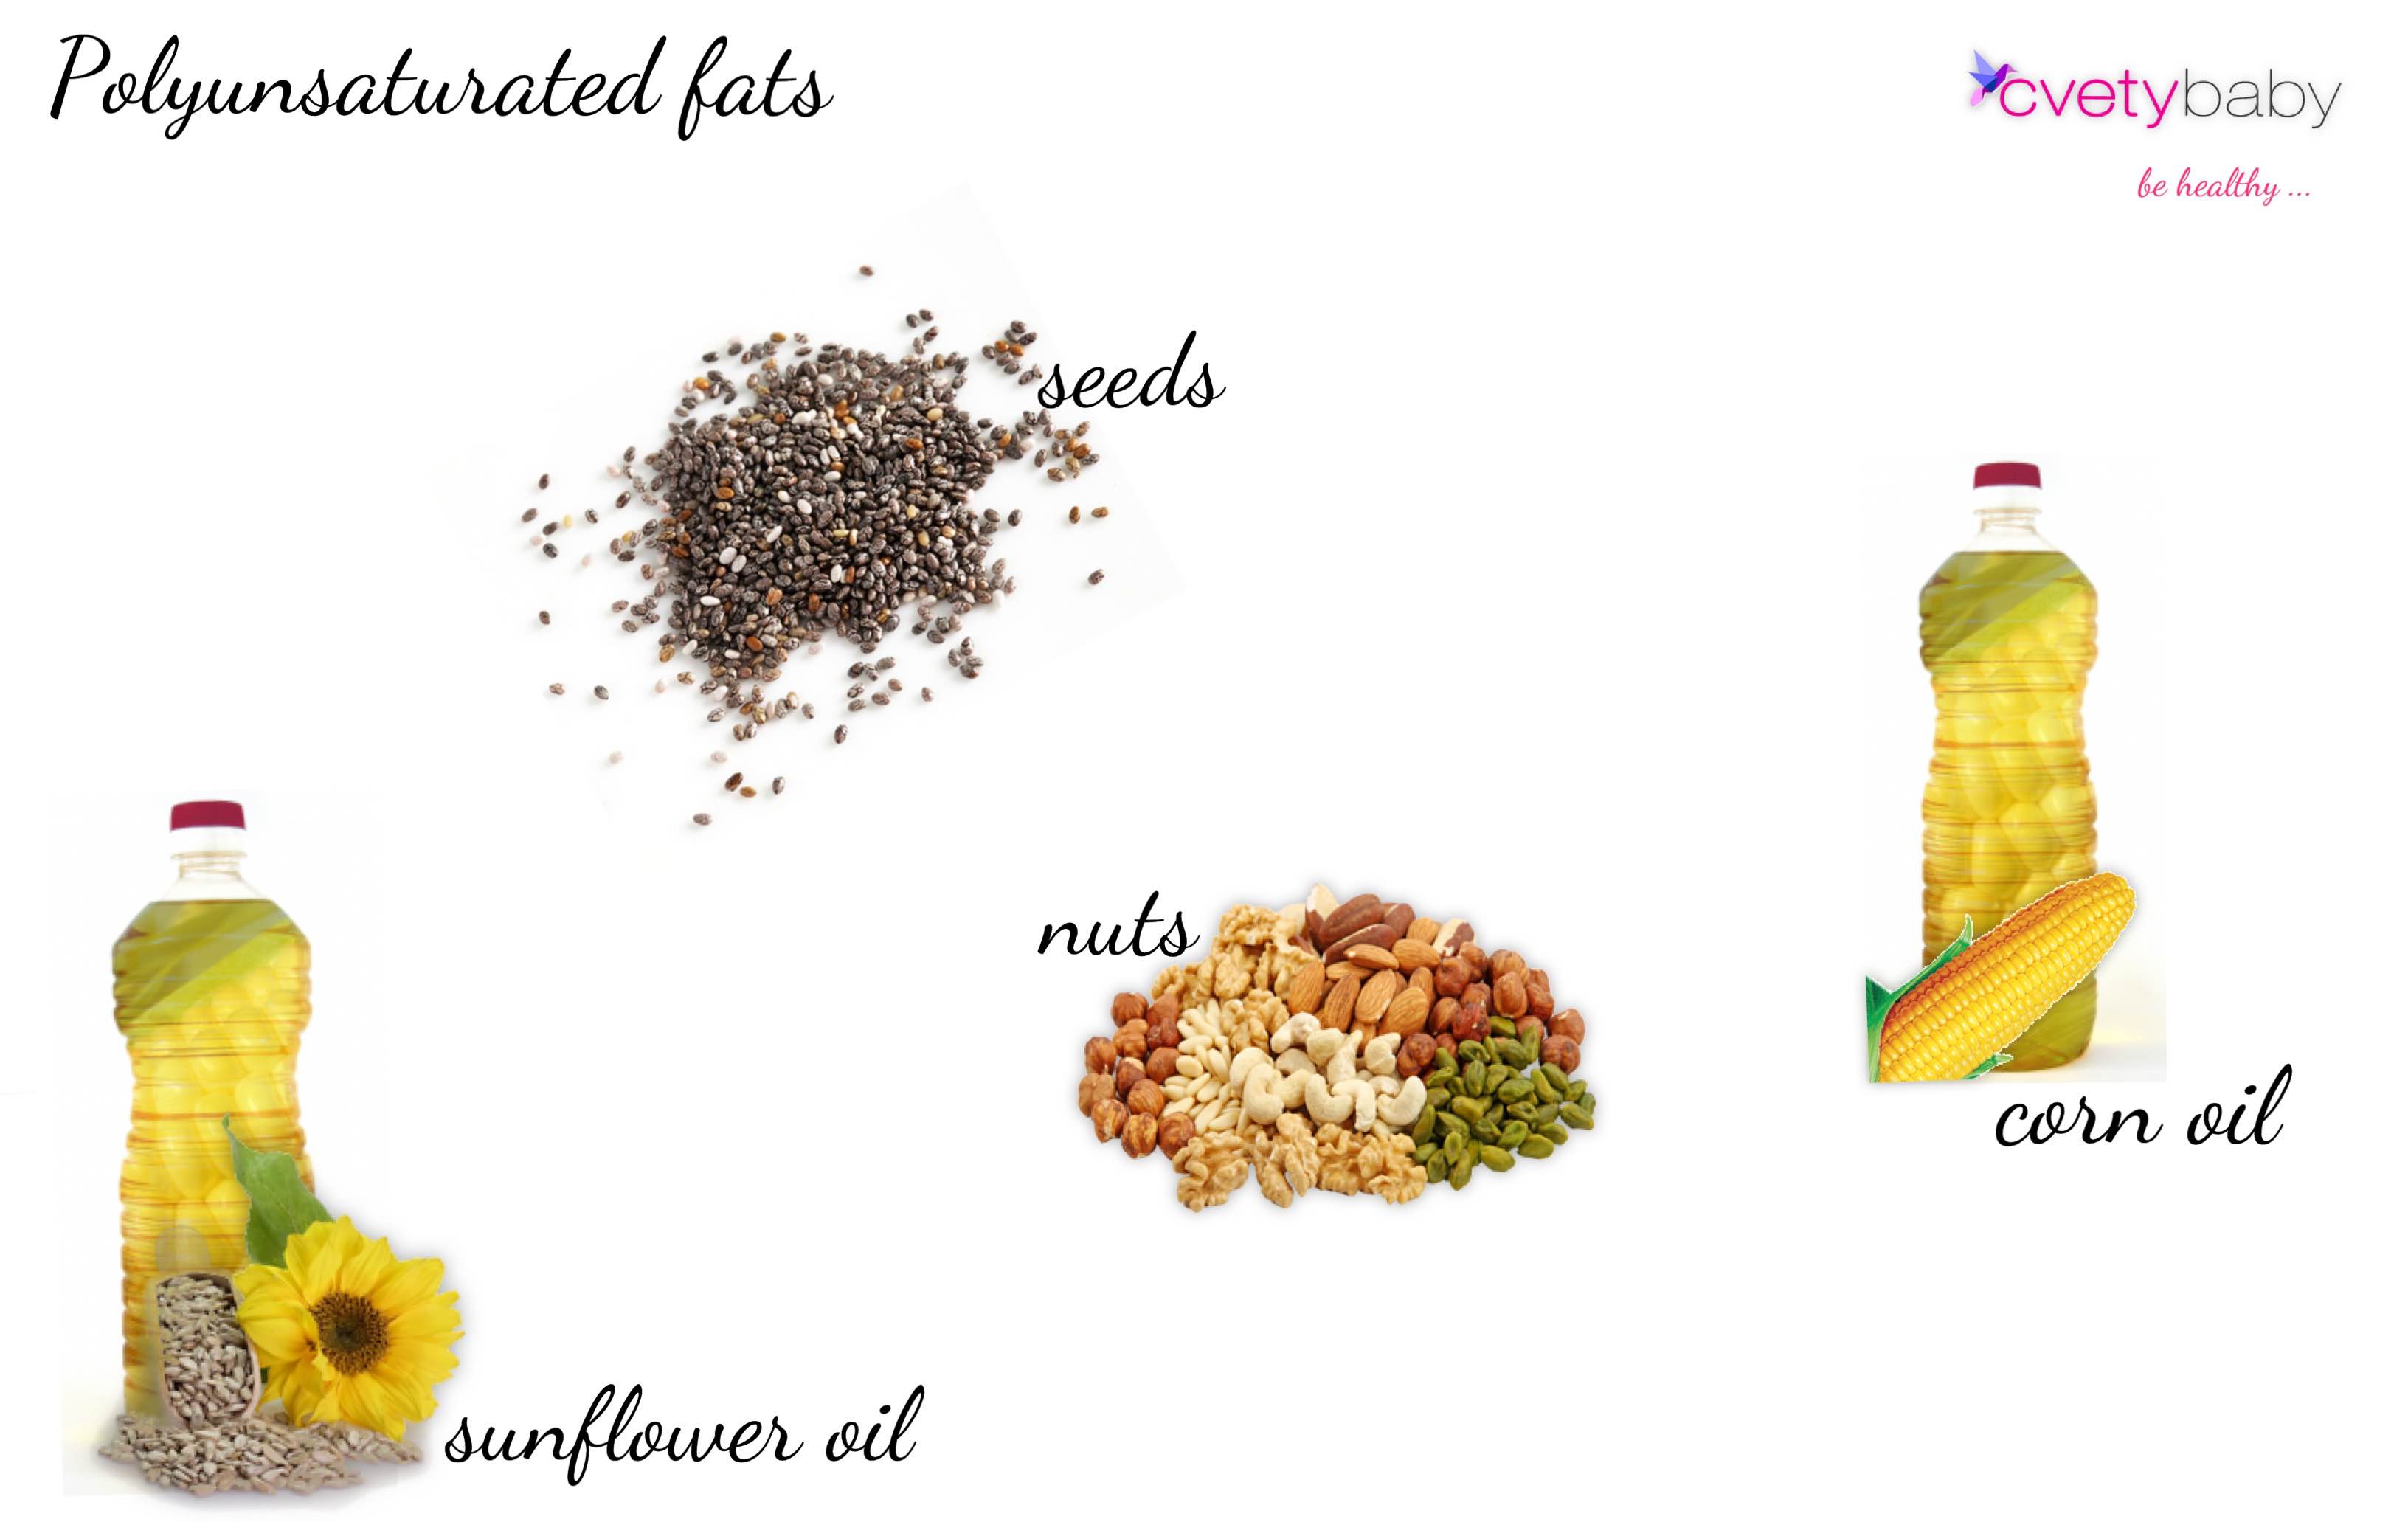 Polyunsaturated fats